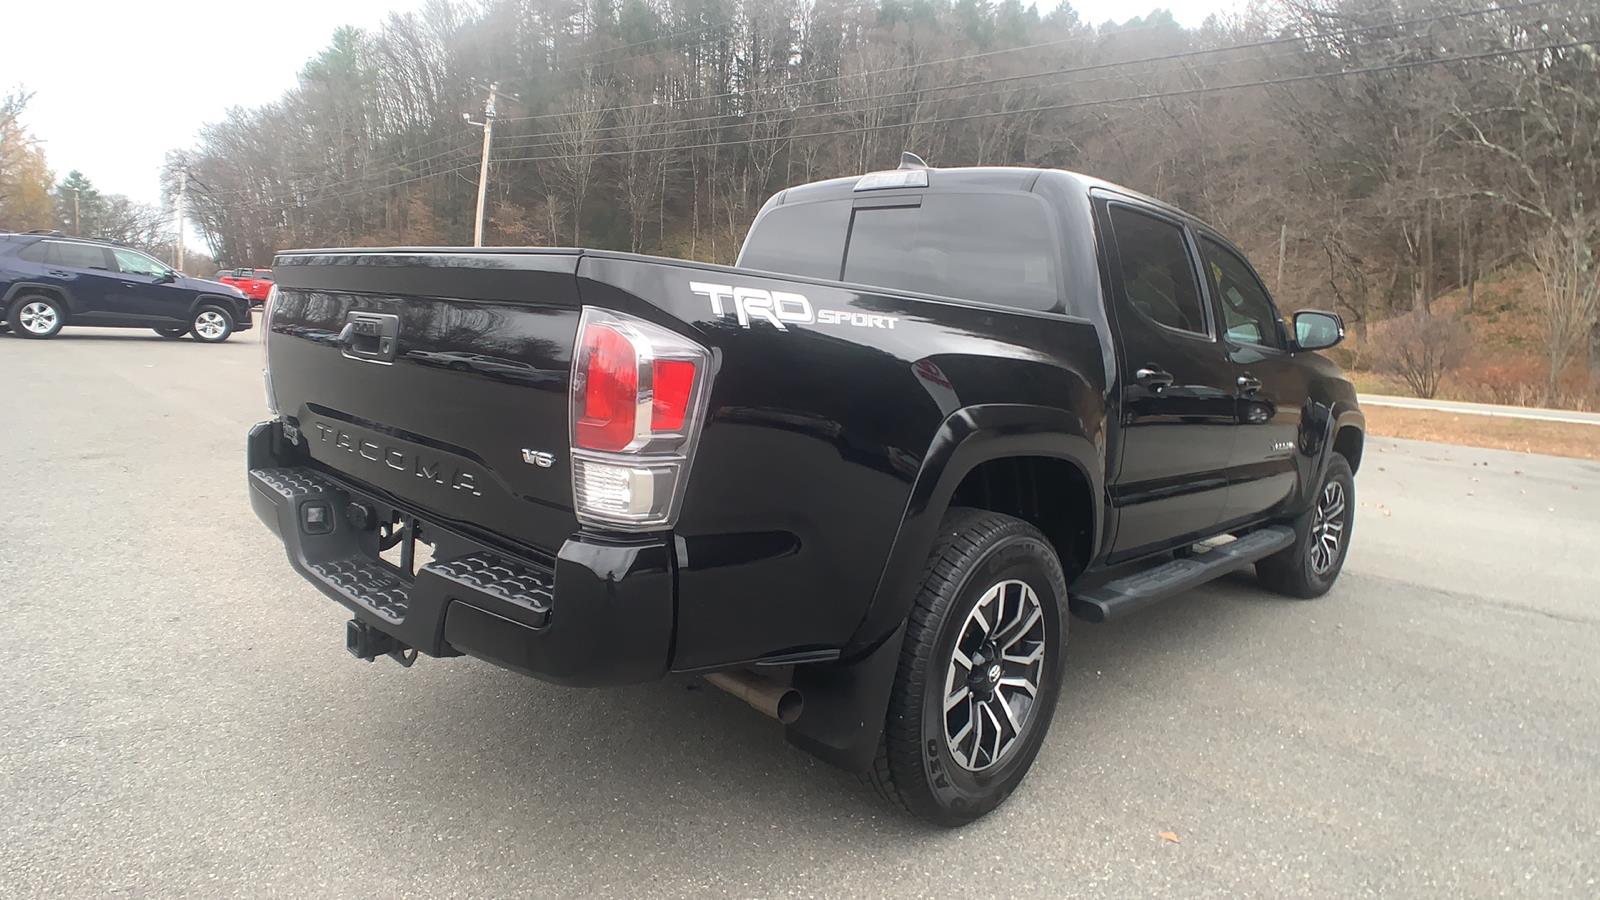 2022 Toyota Tacoma 2WD Short Bed